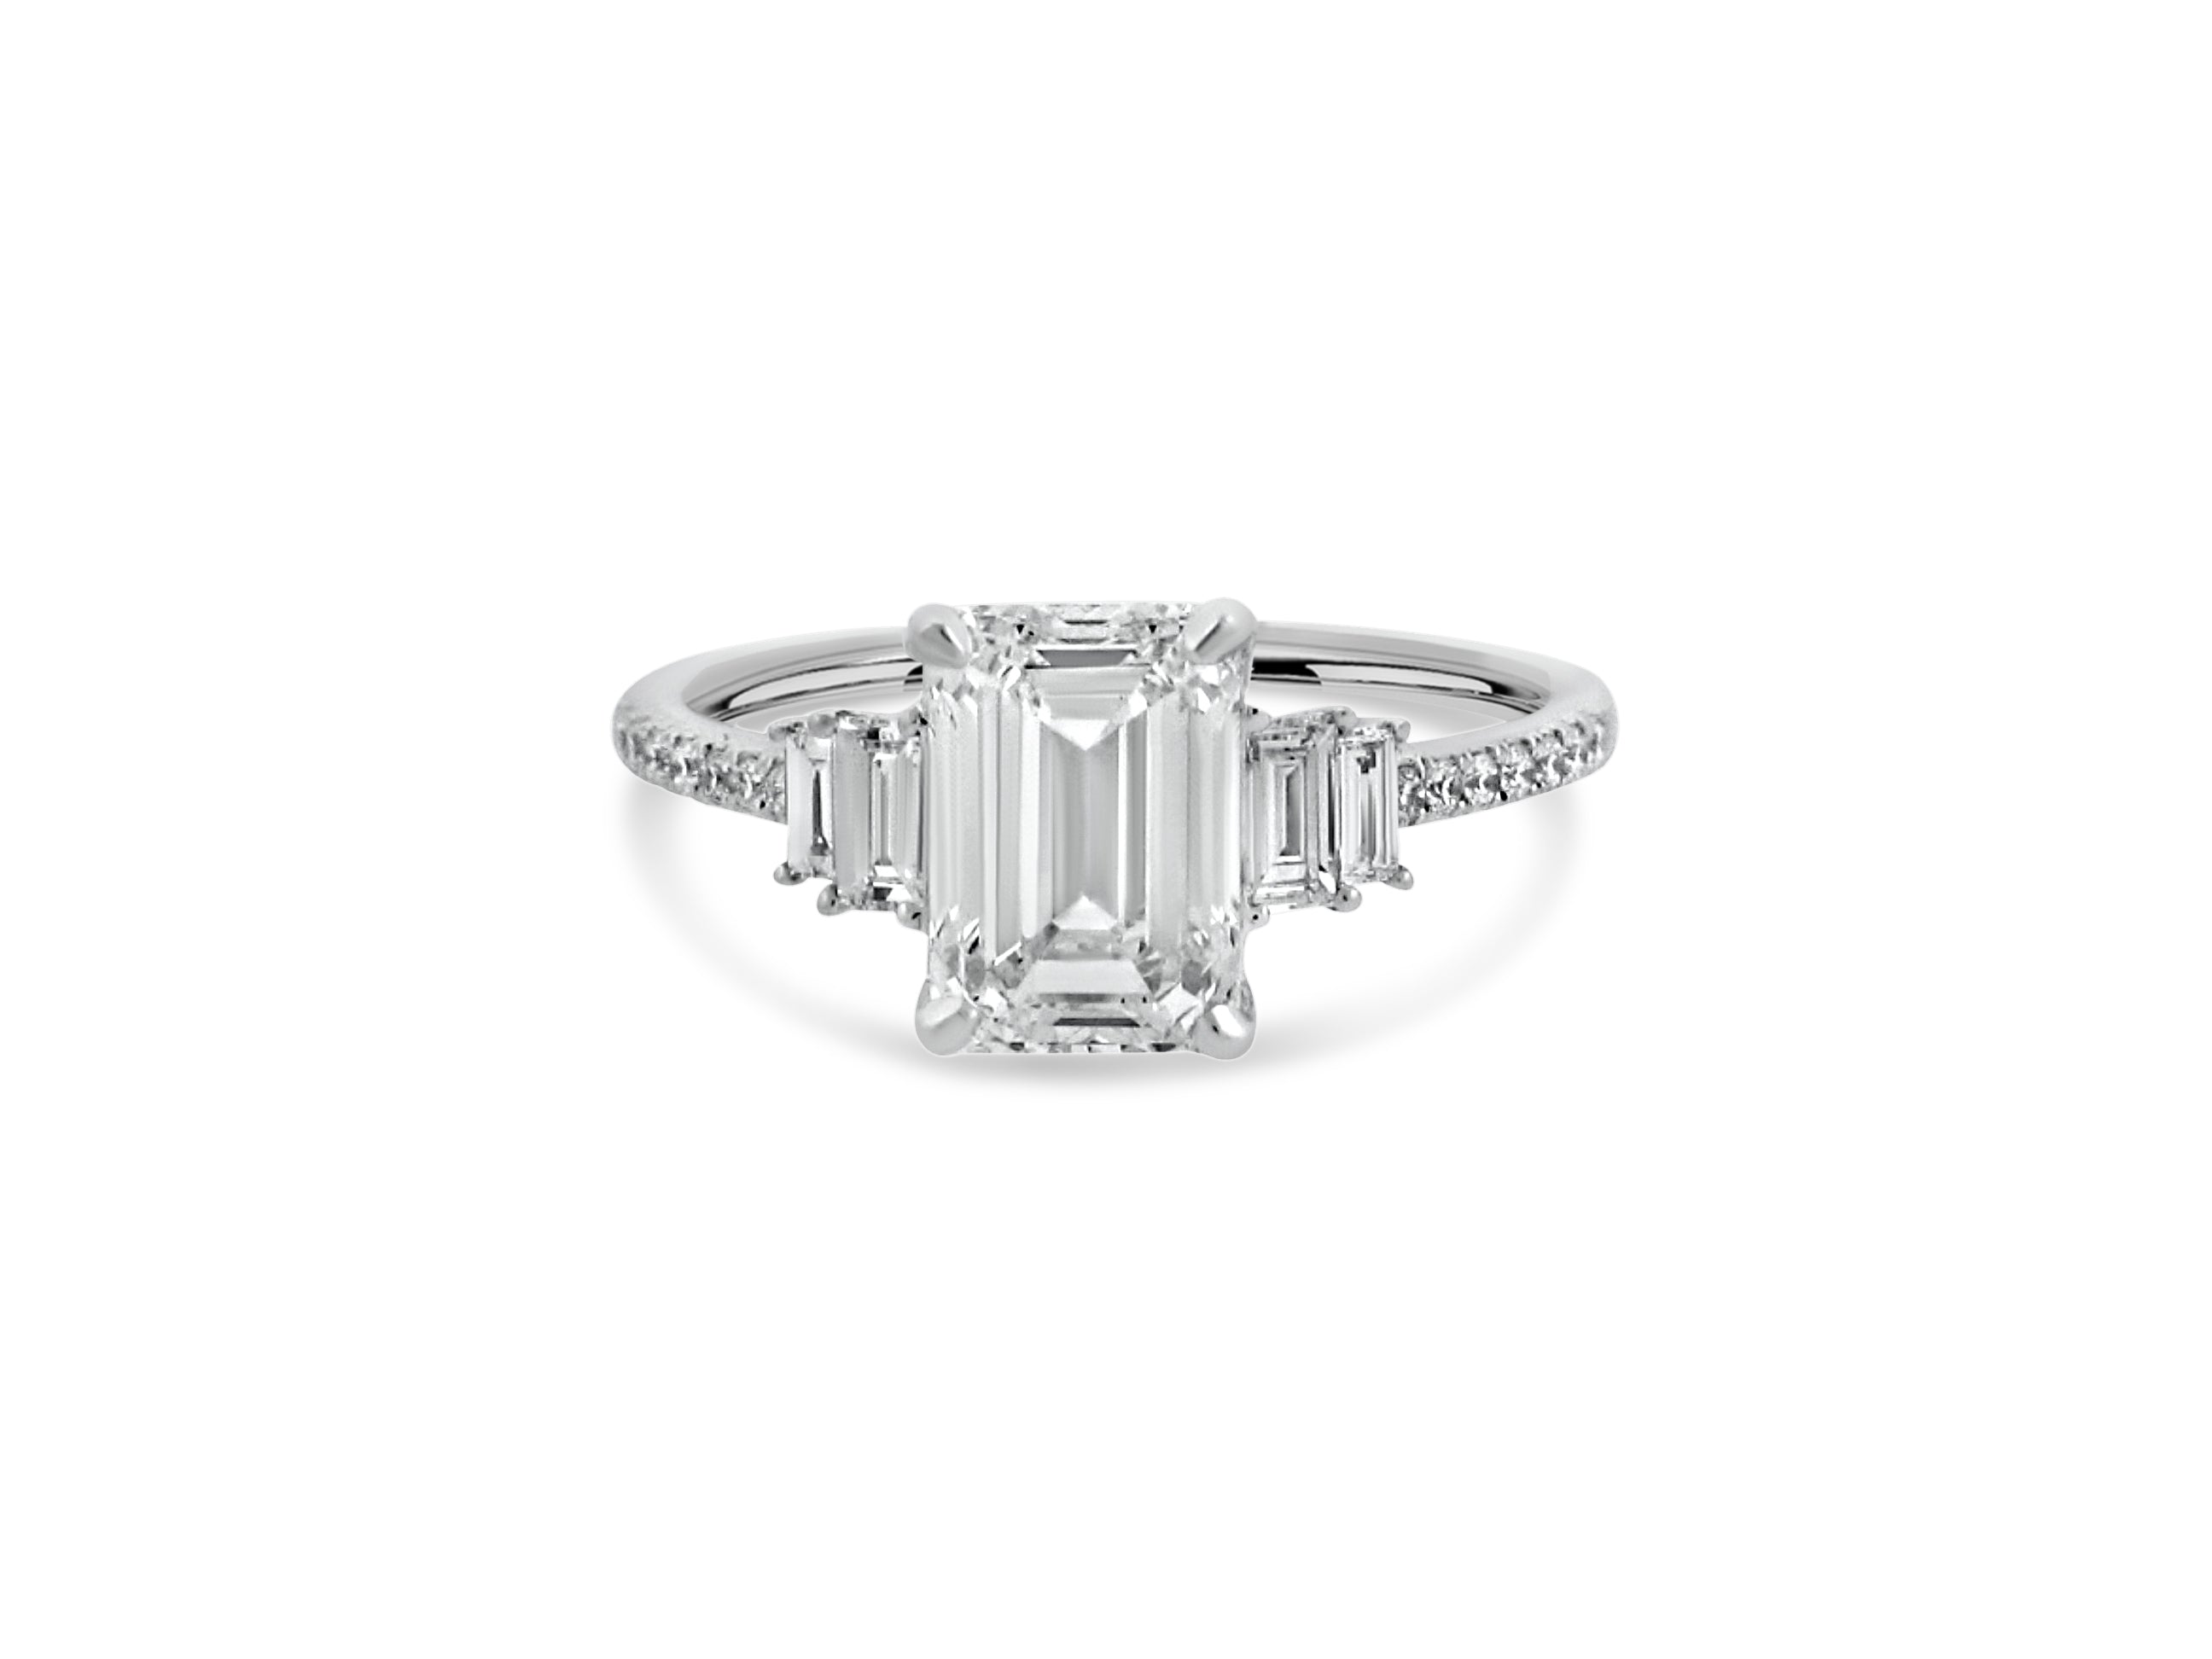 PRIVE' 18K WHITE GOLD 2.01CT VS2 CLARITY AND F COLOR EMERALD CUT SWAROVSKI LAB GROWN DIAMOND SURROUNDED BY .33CT VS/G MOUNTING NATURAL DIAMONDS.